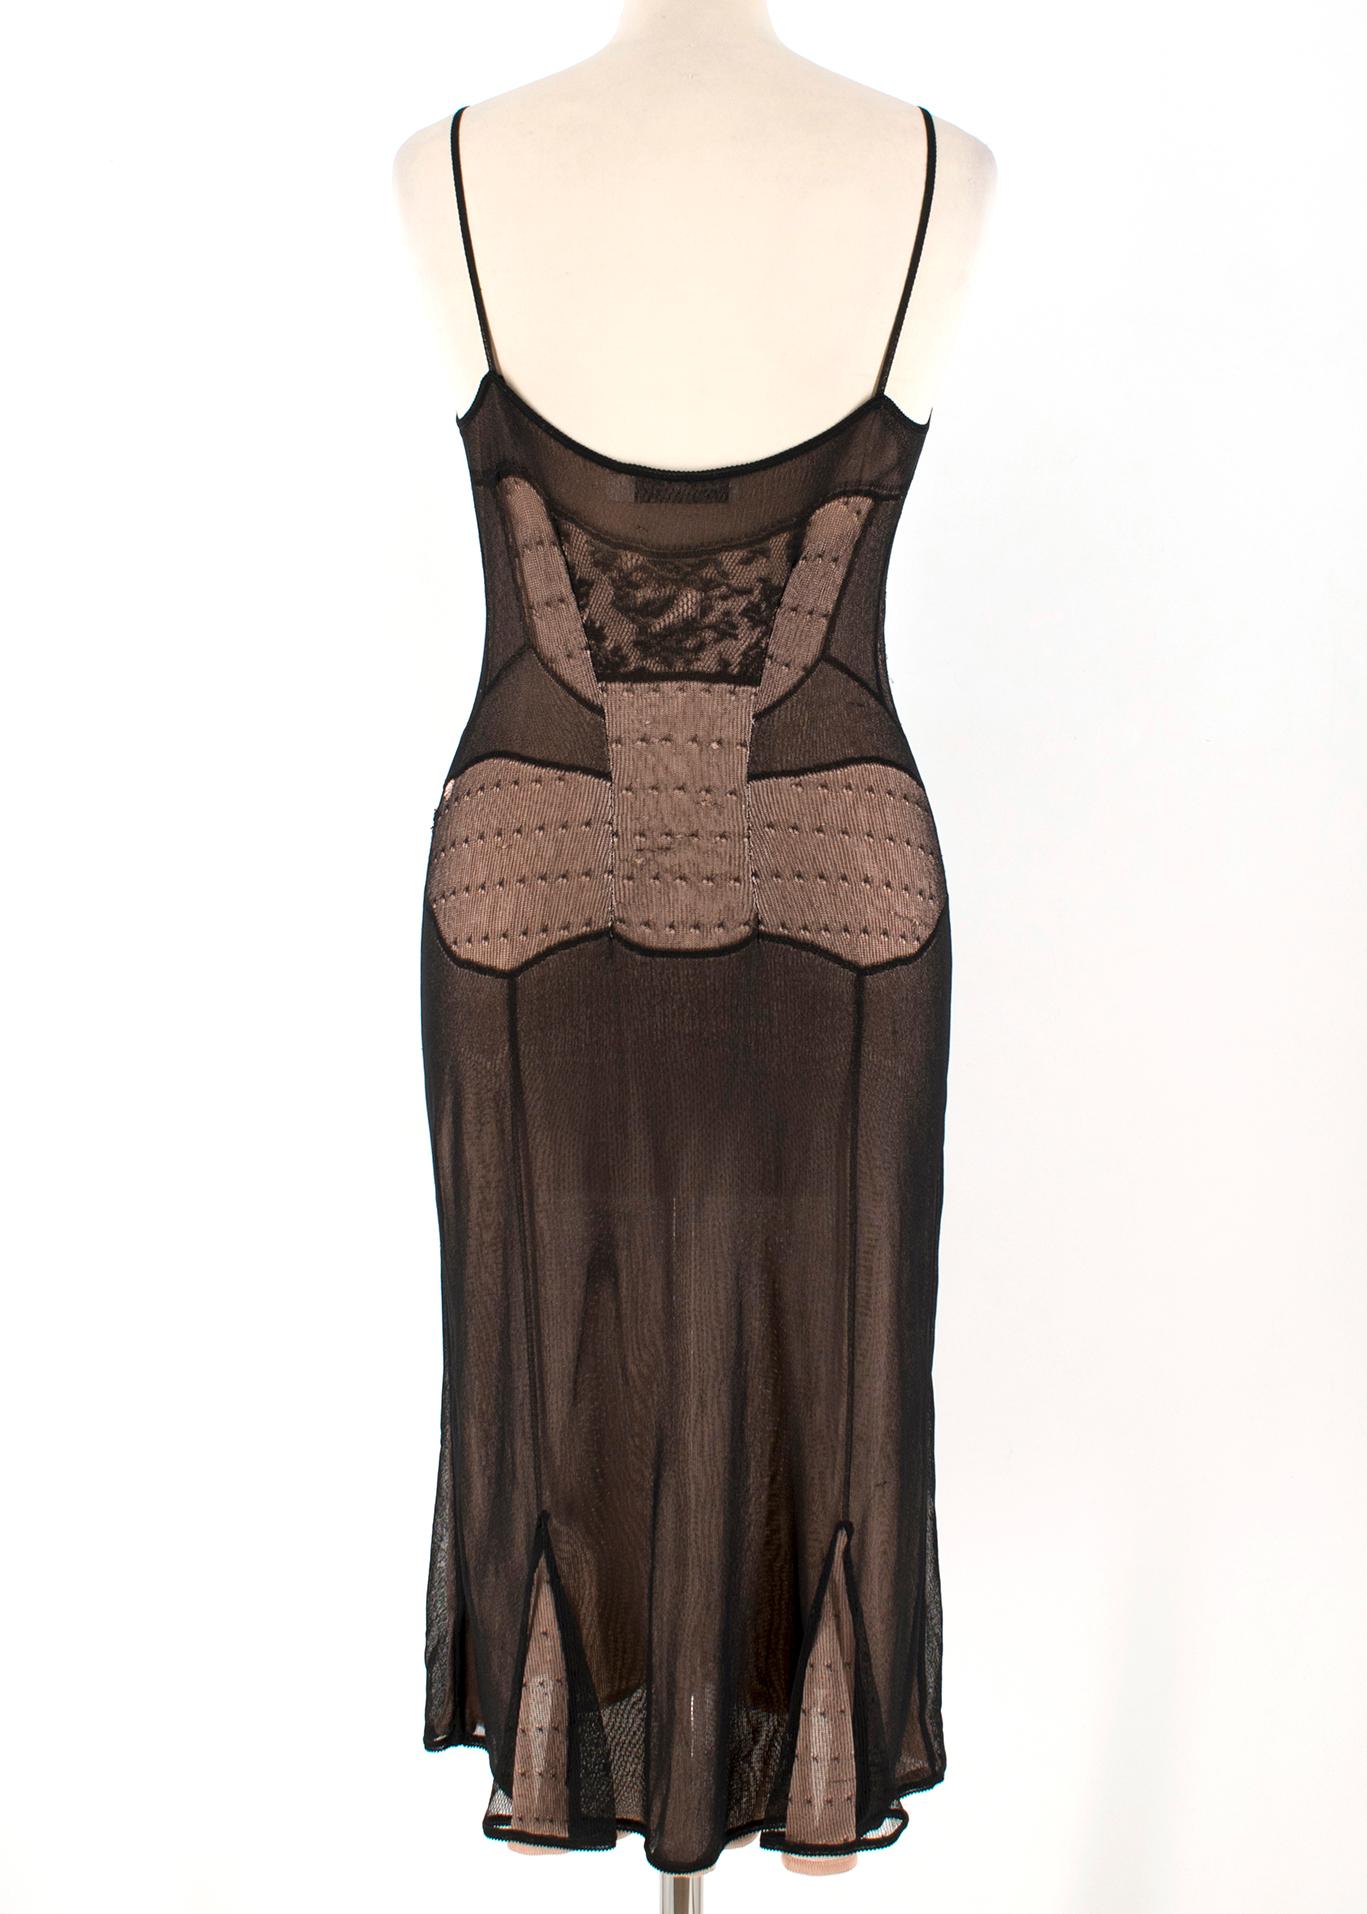 black and nude lace dress